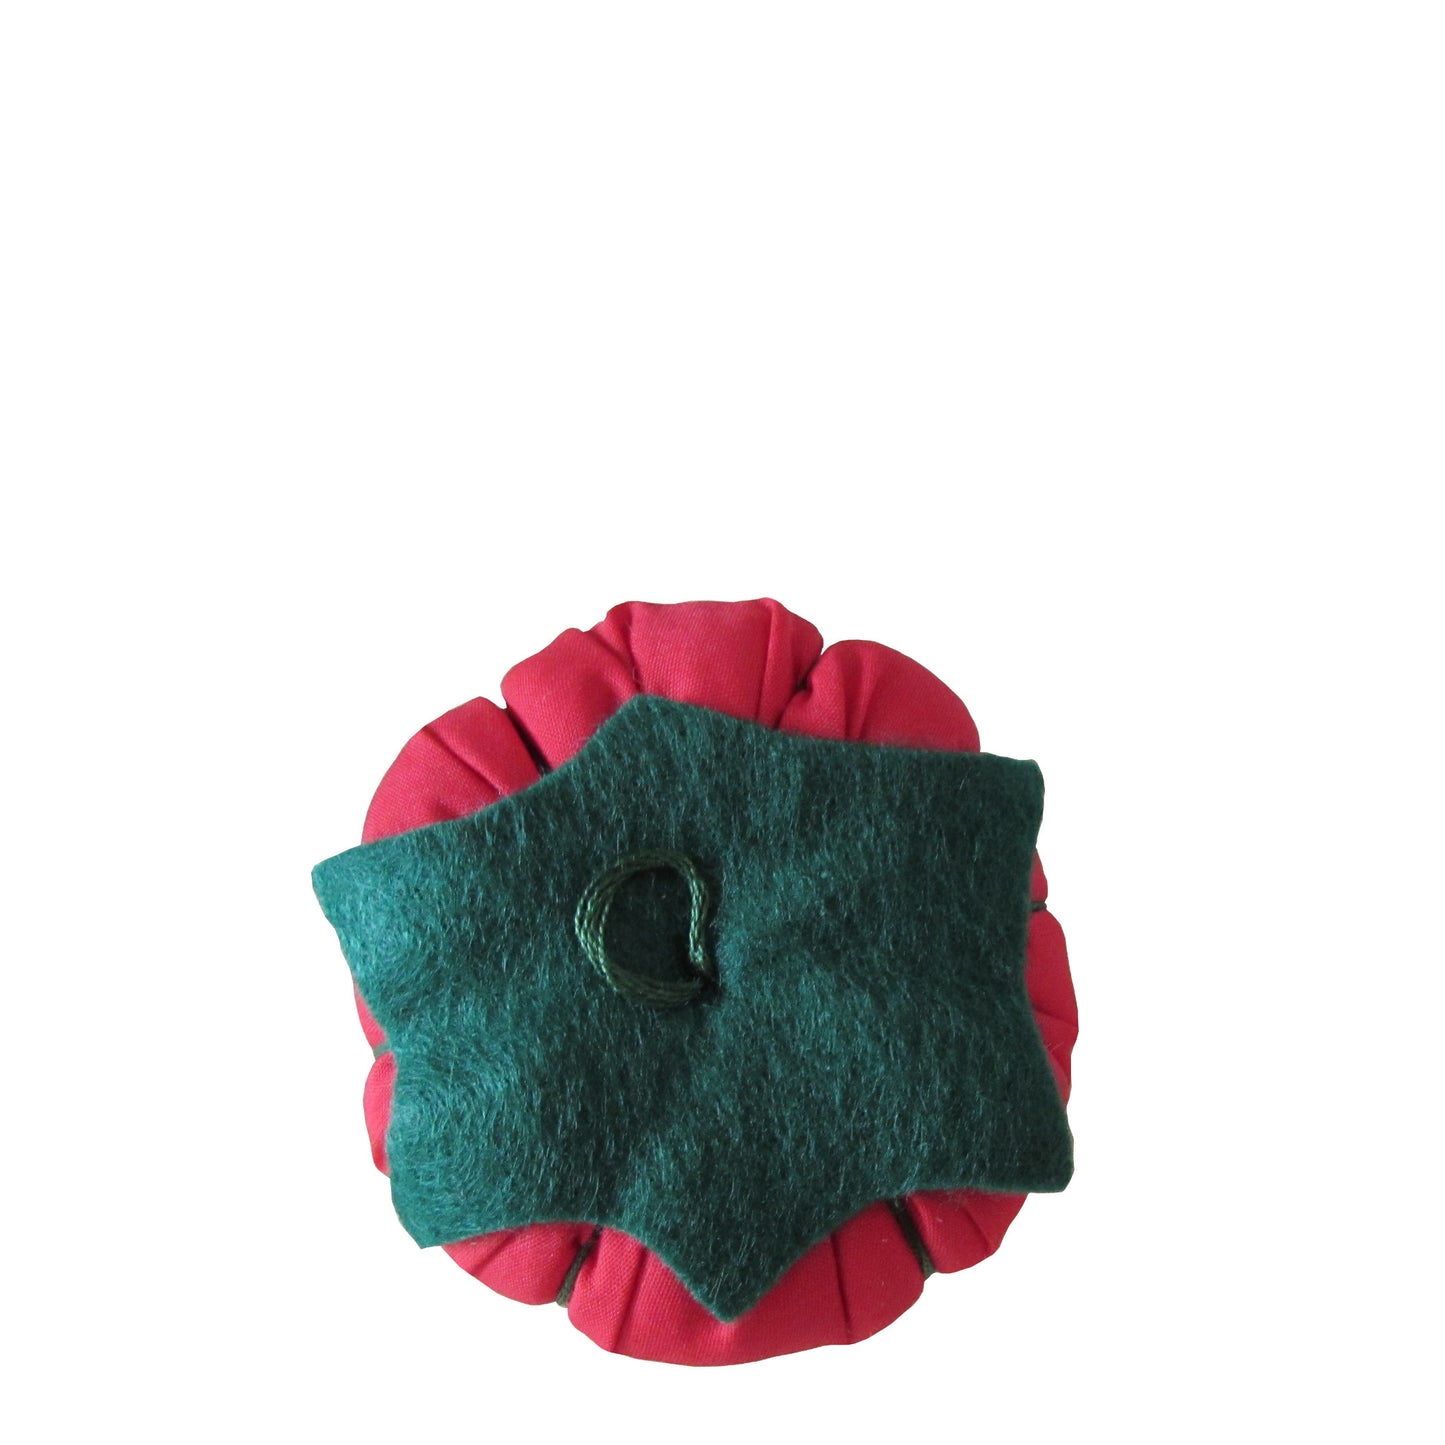 Green Top Red Tomato Pincushion top view